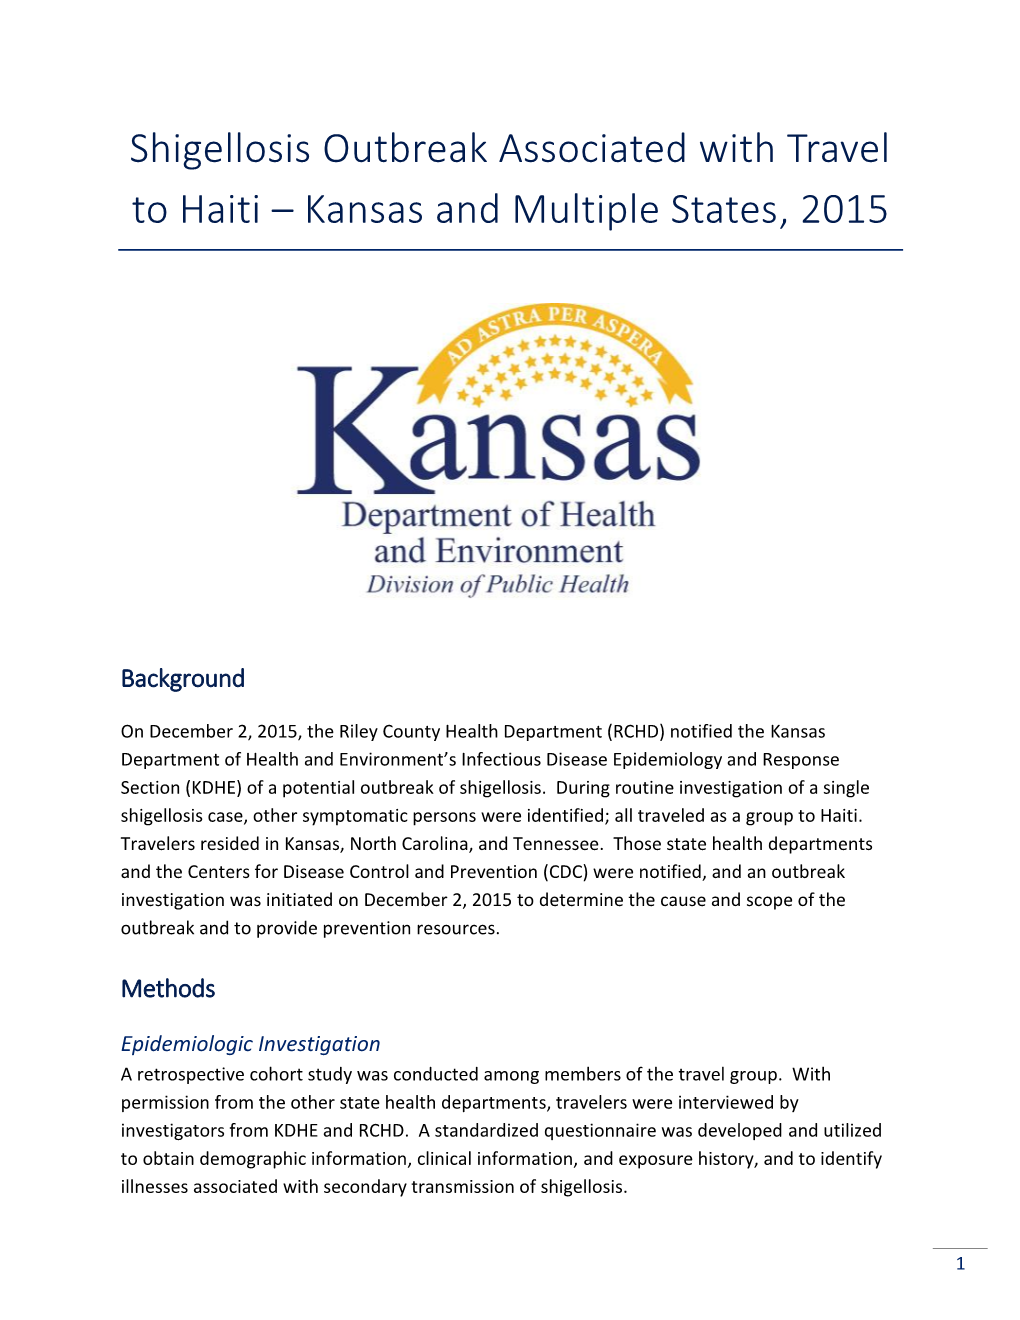 Shigellosis Outbreak Associated with Travel to Haiti – Kansas and Multiple States, 2015